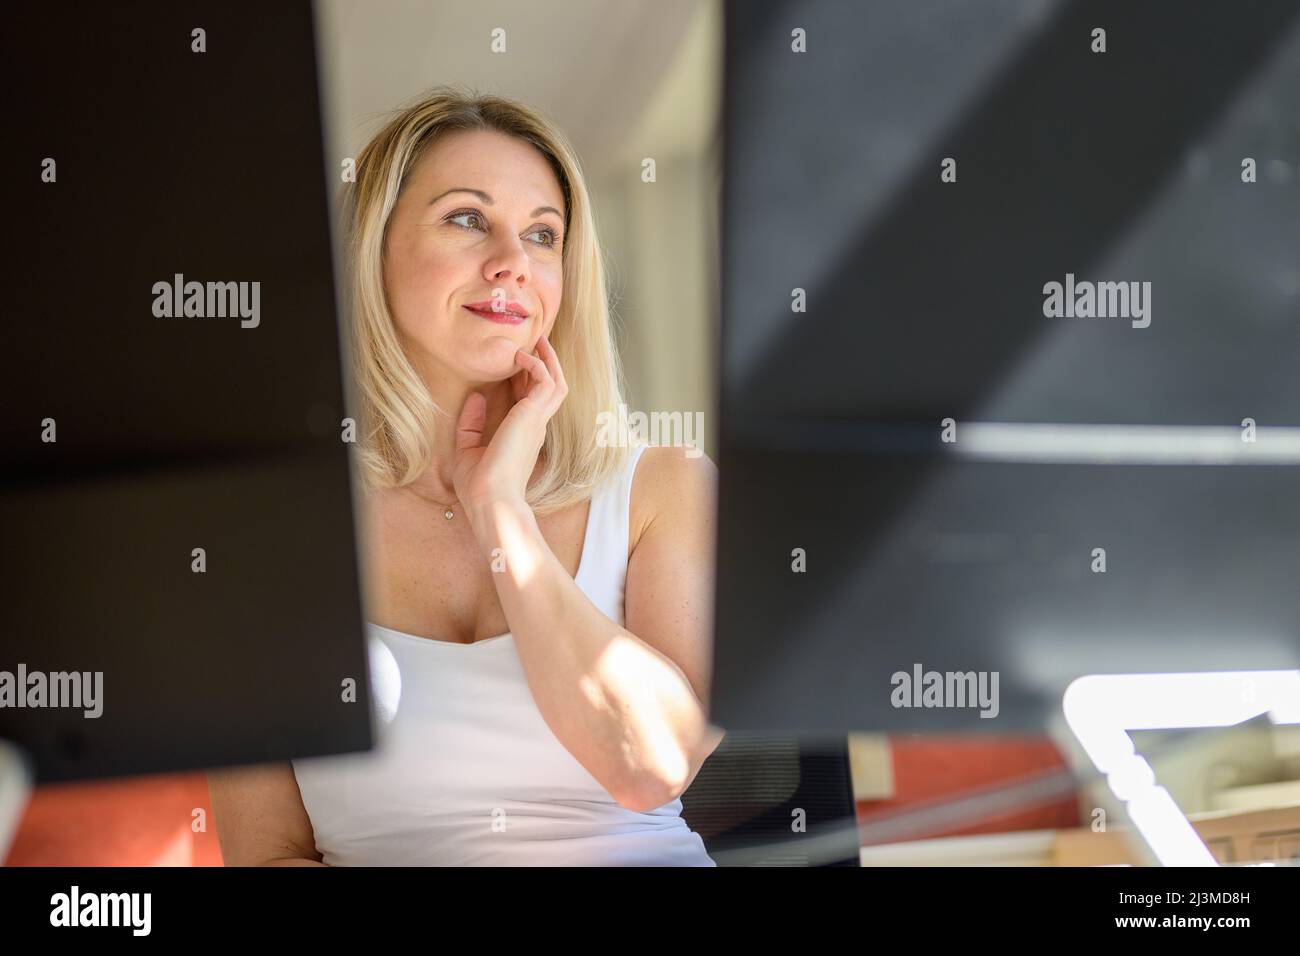 Thoughtful female business person thinking and looking away while working and daydreaming in home office Stock Photo